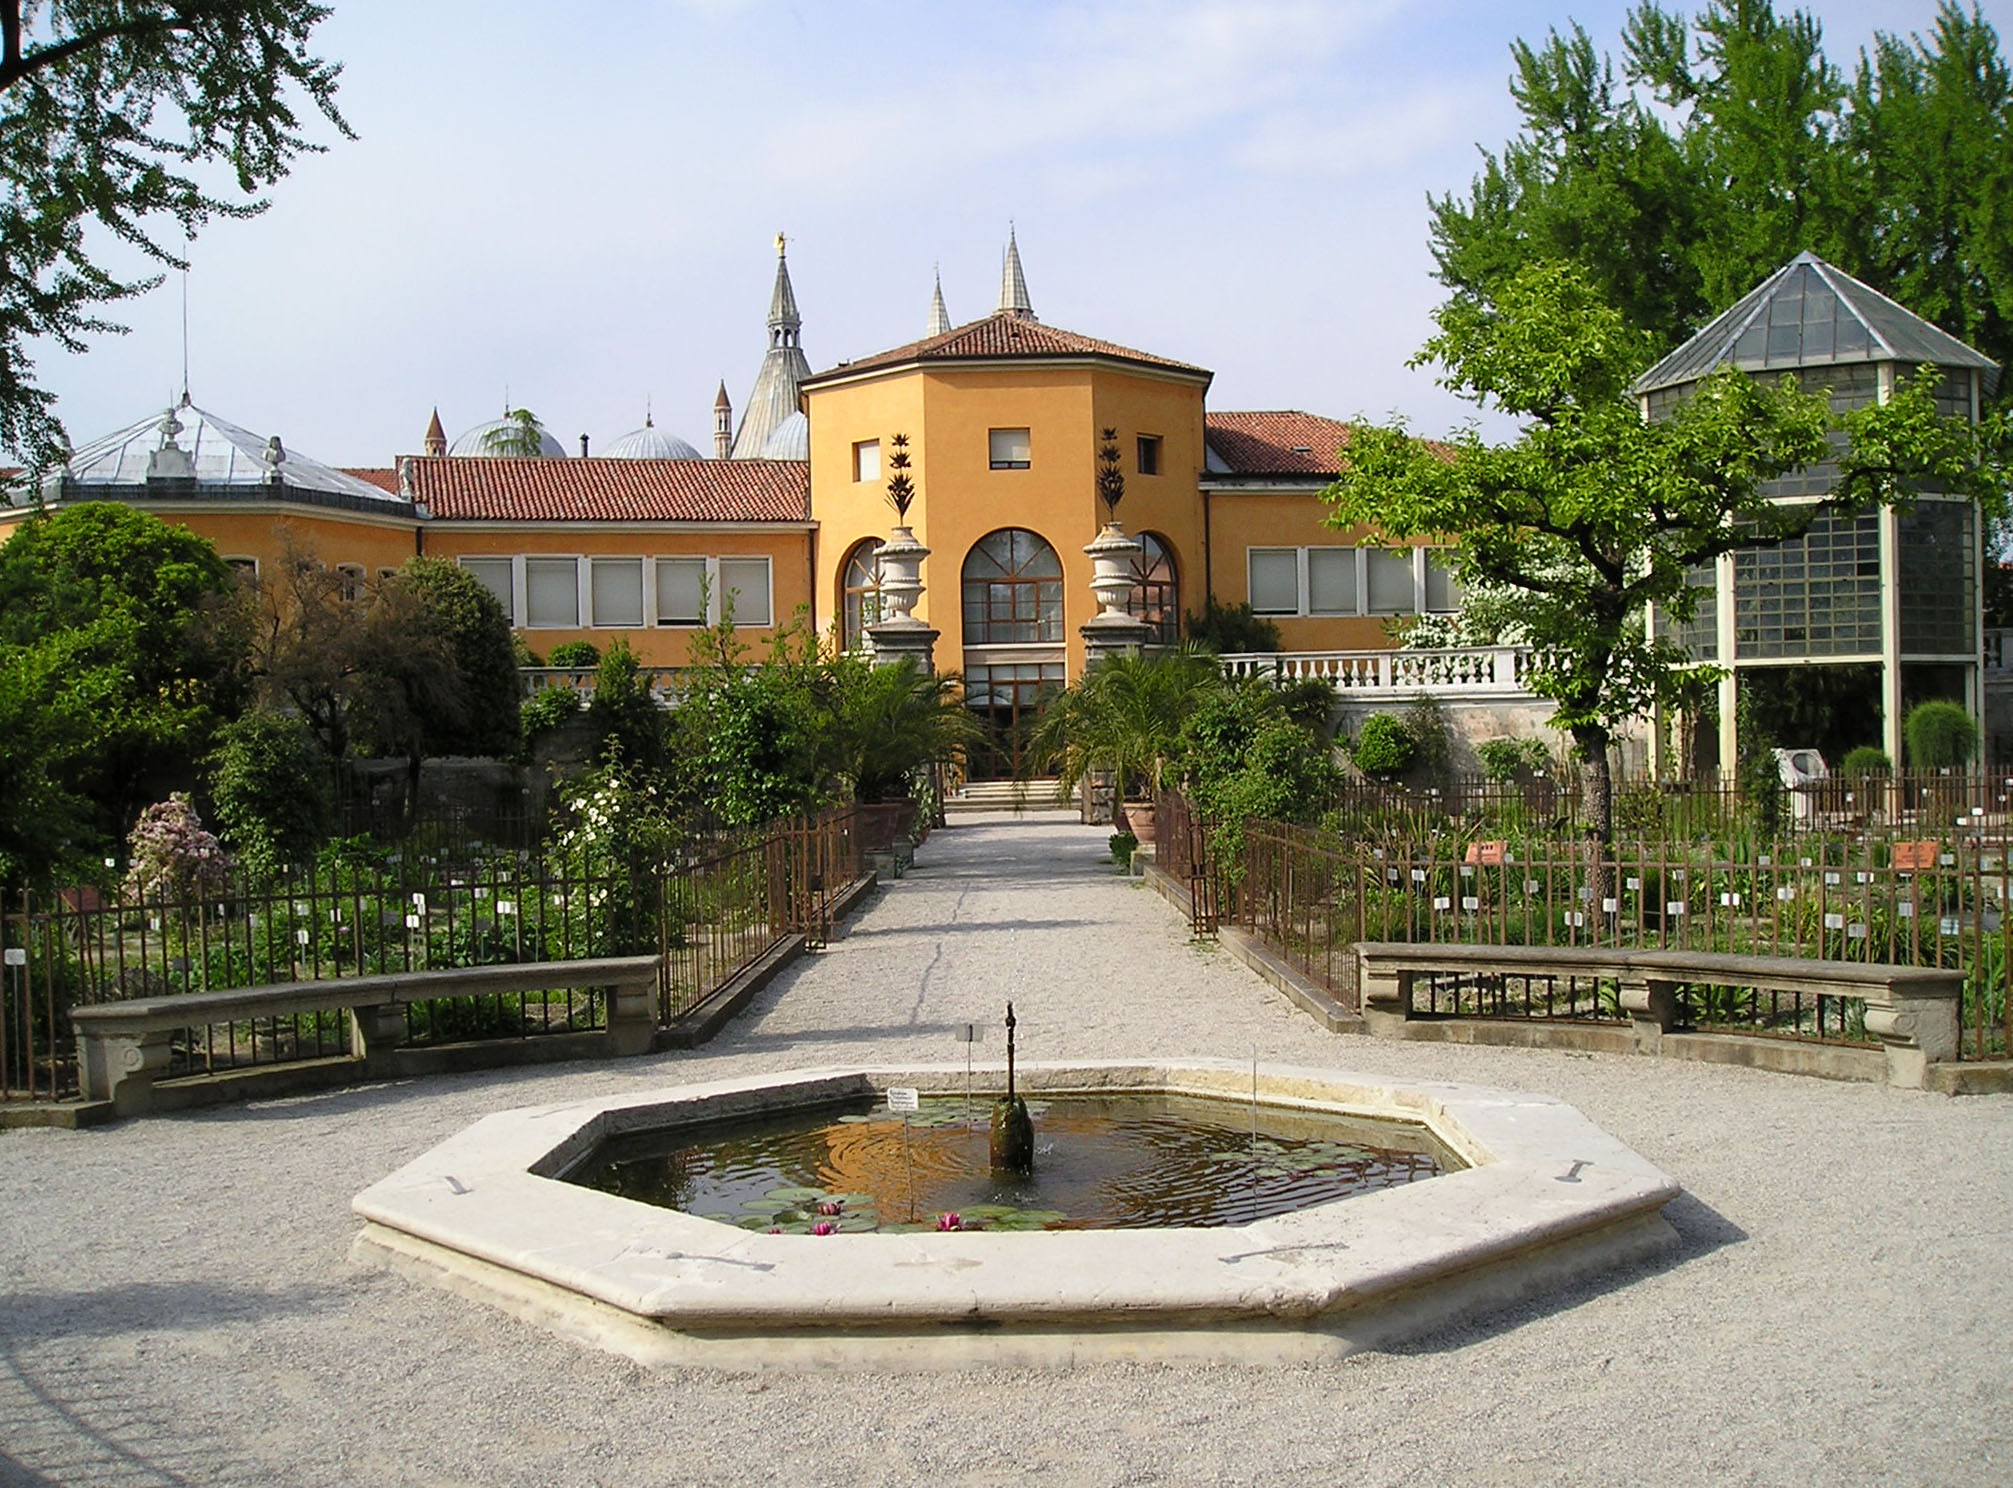 The fourth-largest arboretum in Europe located in Kórnik, in Greater Poland  - Let's Teach Europe